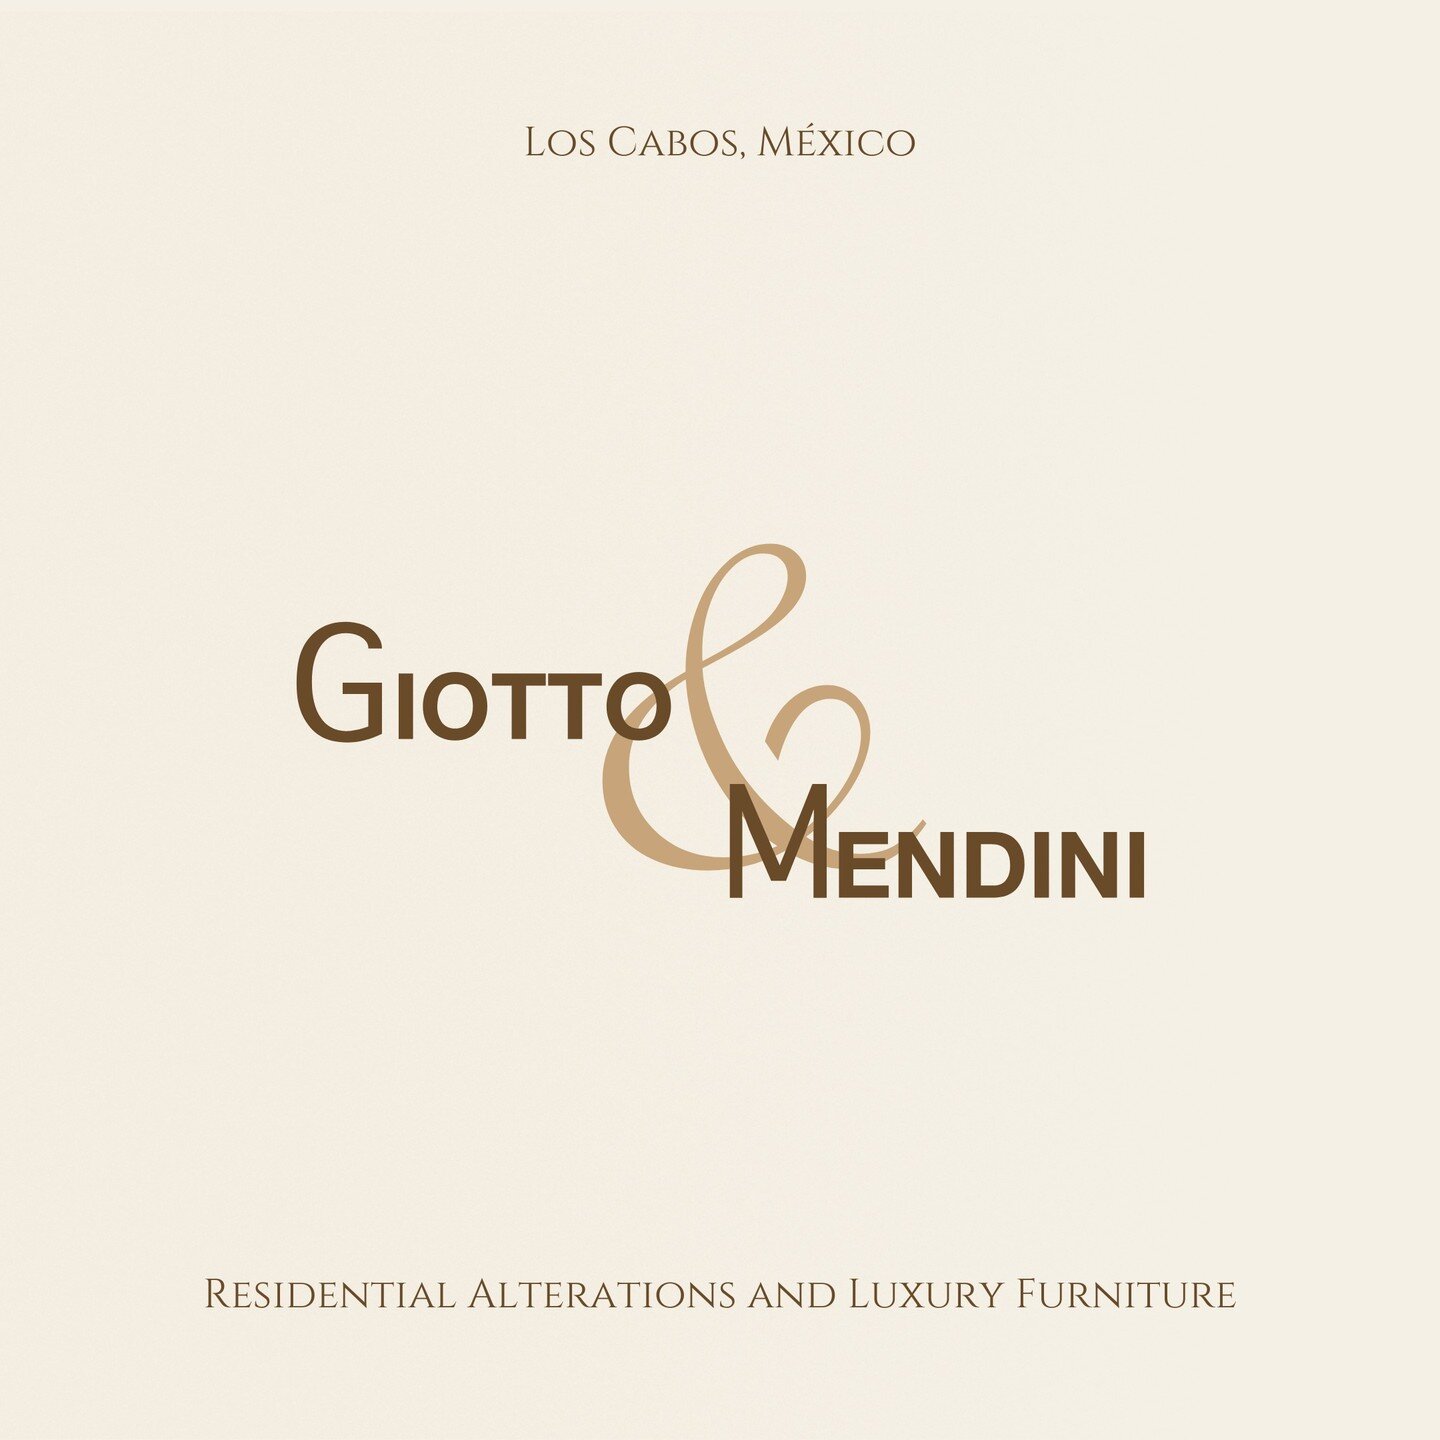 Experience the true meaning of luxury living with Giotto &amp; Mendini's residential alterations, custom building, and interior design services.

We'd love to hear from you, contact us to schedule a 1:1 appointment!

📞+52 (624)-122-5736
📧info@giott